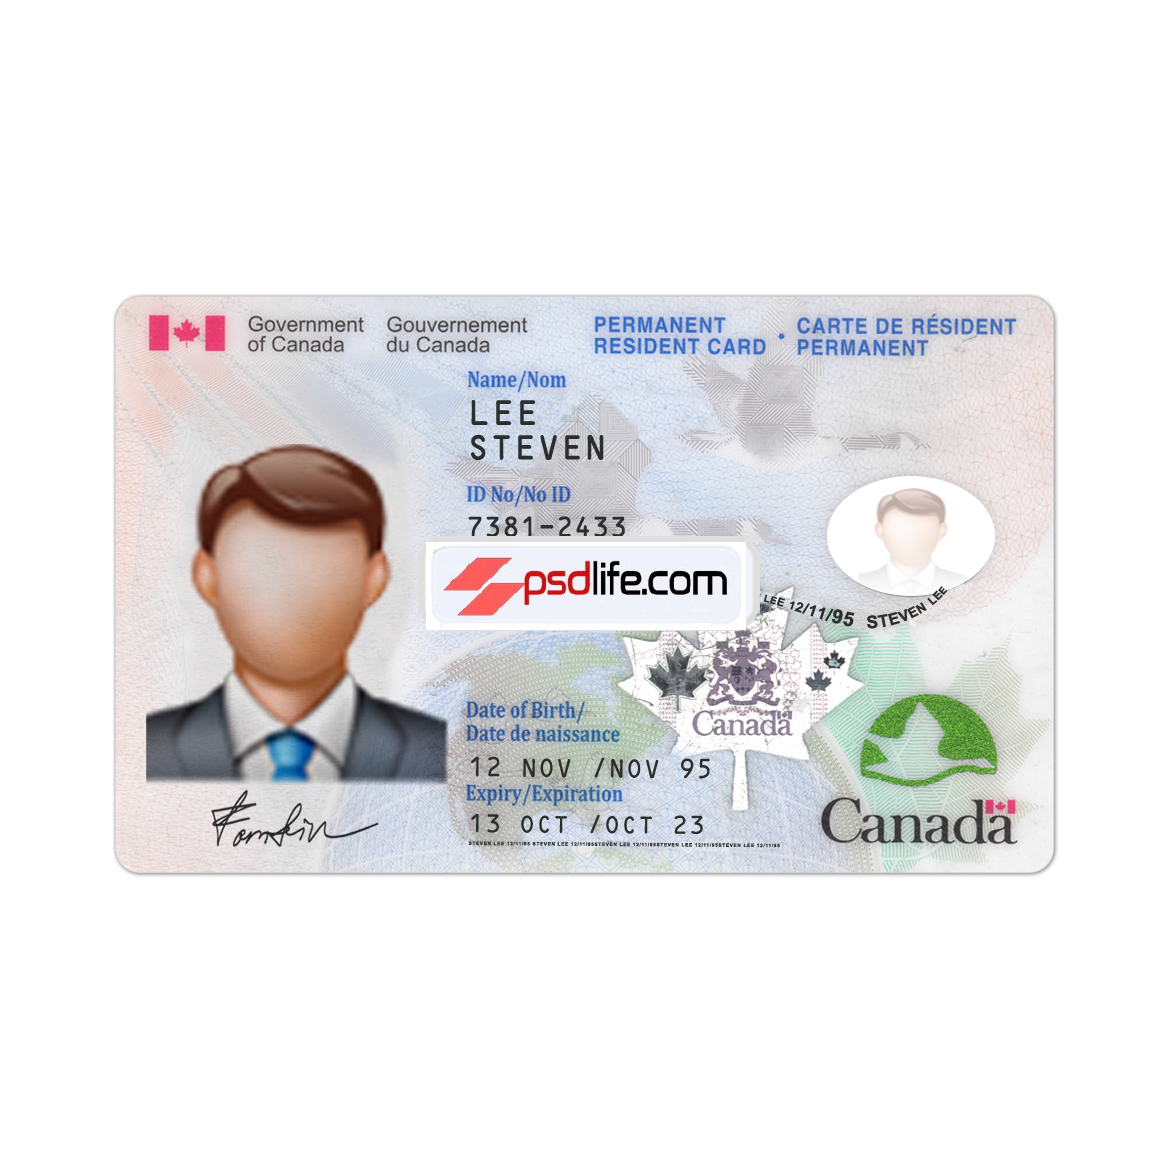 Canada id card Template in psd format for verification crypto websites | Canada id card Template photoshop use for | Fake ID Card